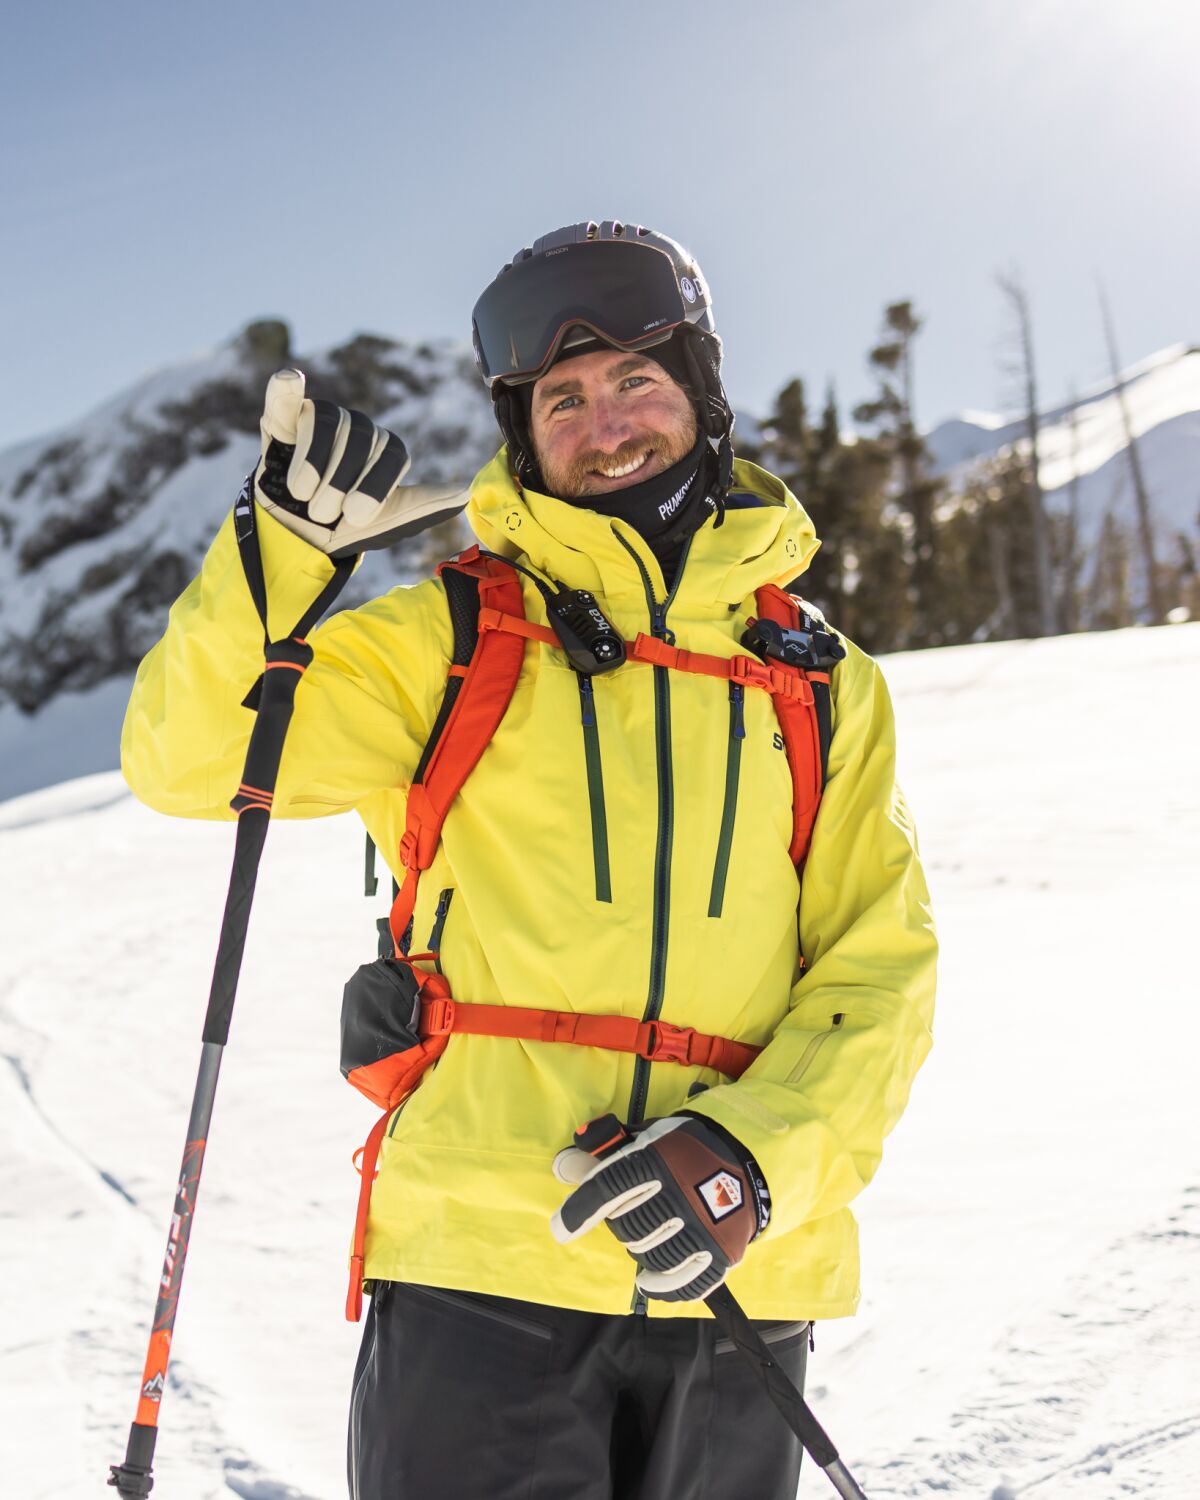 Vertical outdoors image of a smiling man with facial hair in skiing helmet, bright yellow jacket and holding skiing poles.